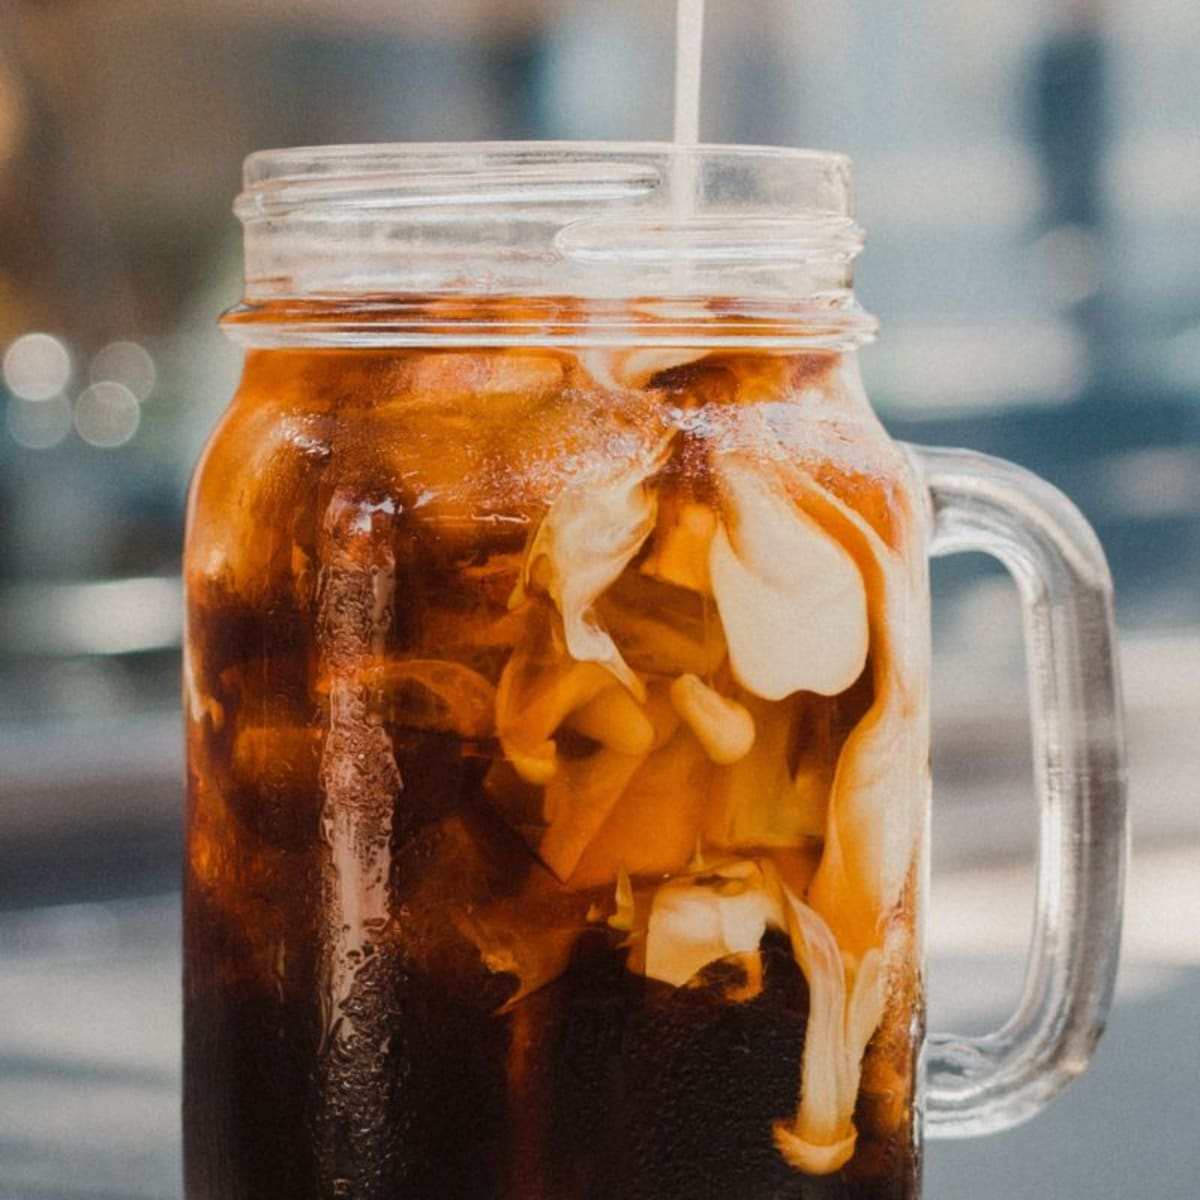 This Cold Brew Coffee Maker Is Now $20 on  - TheStreet